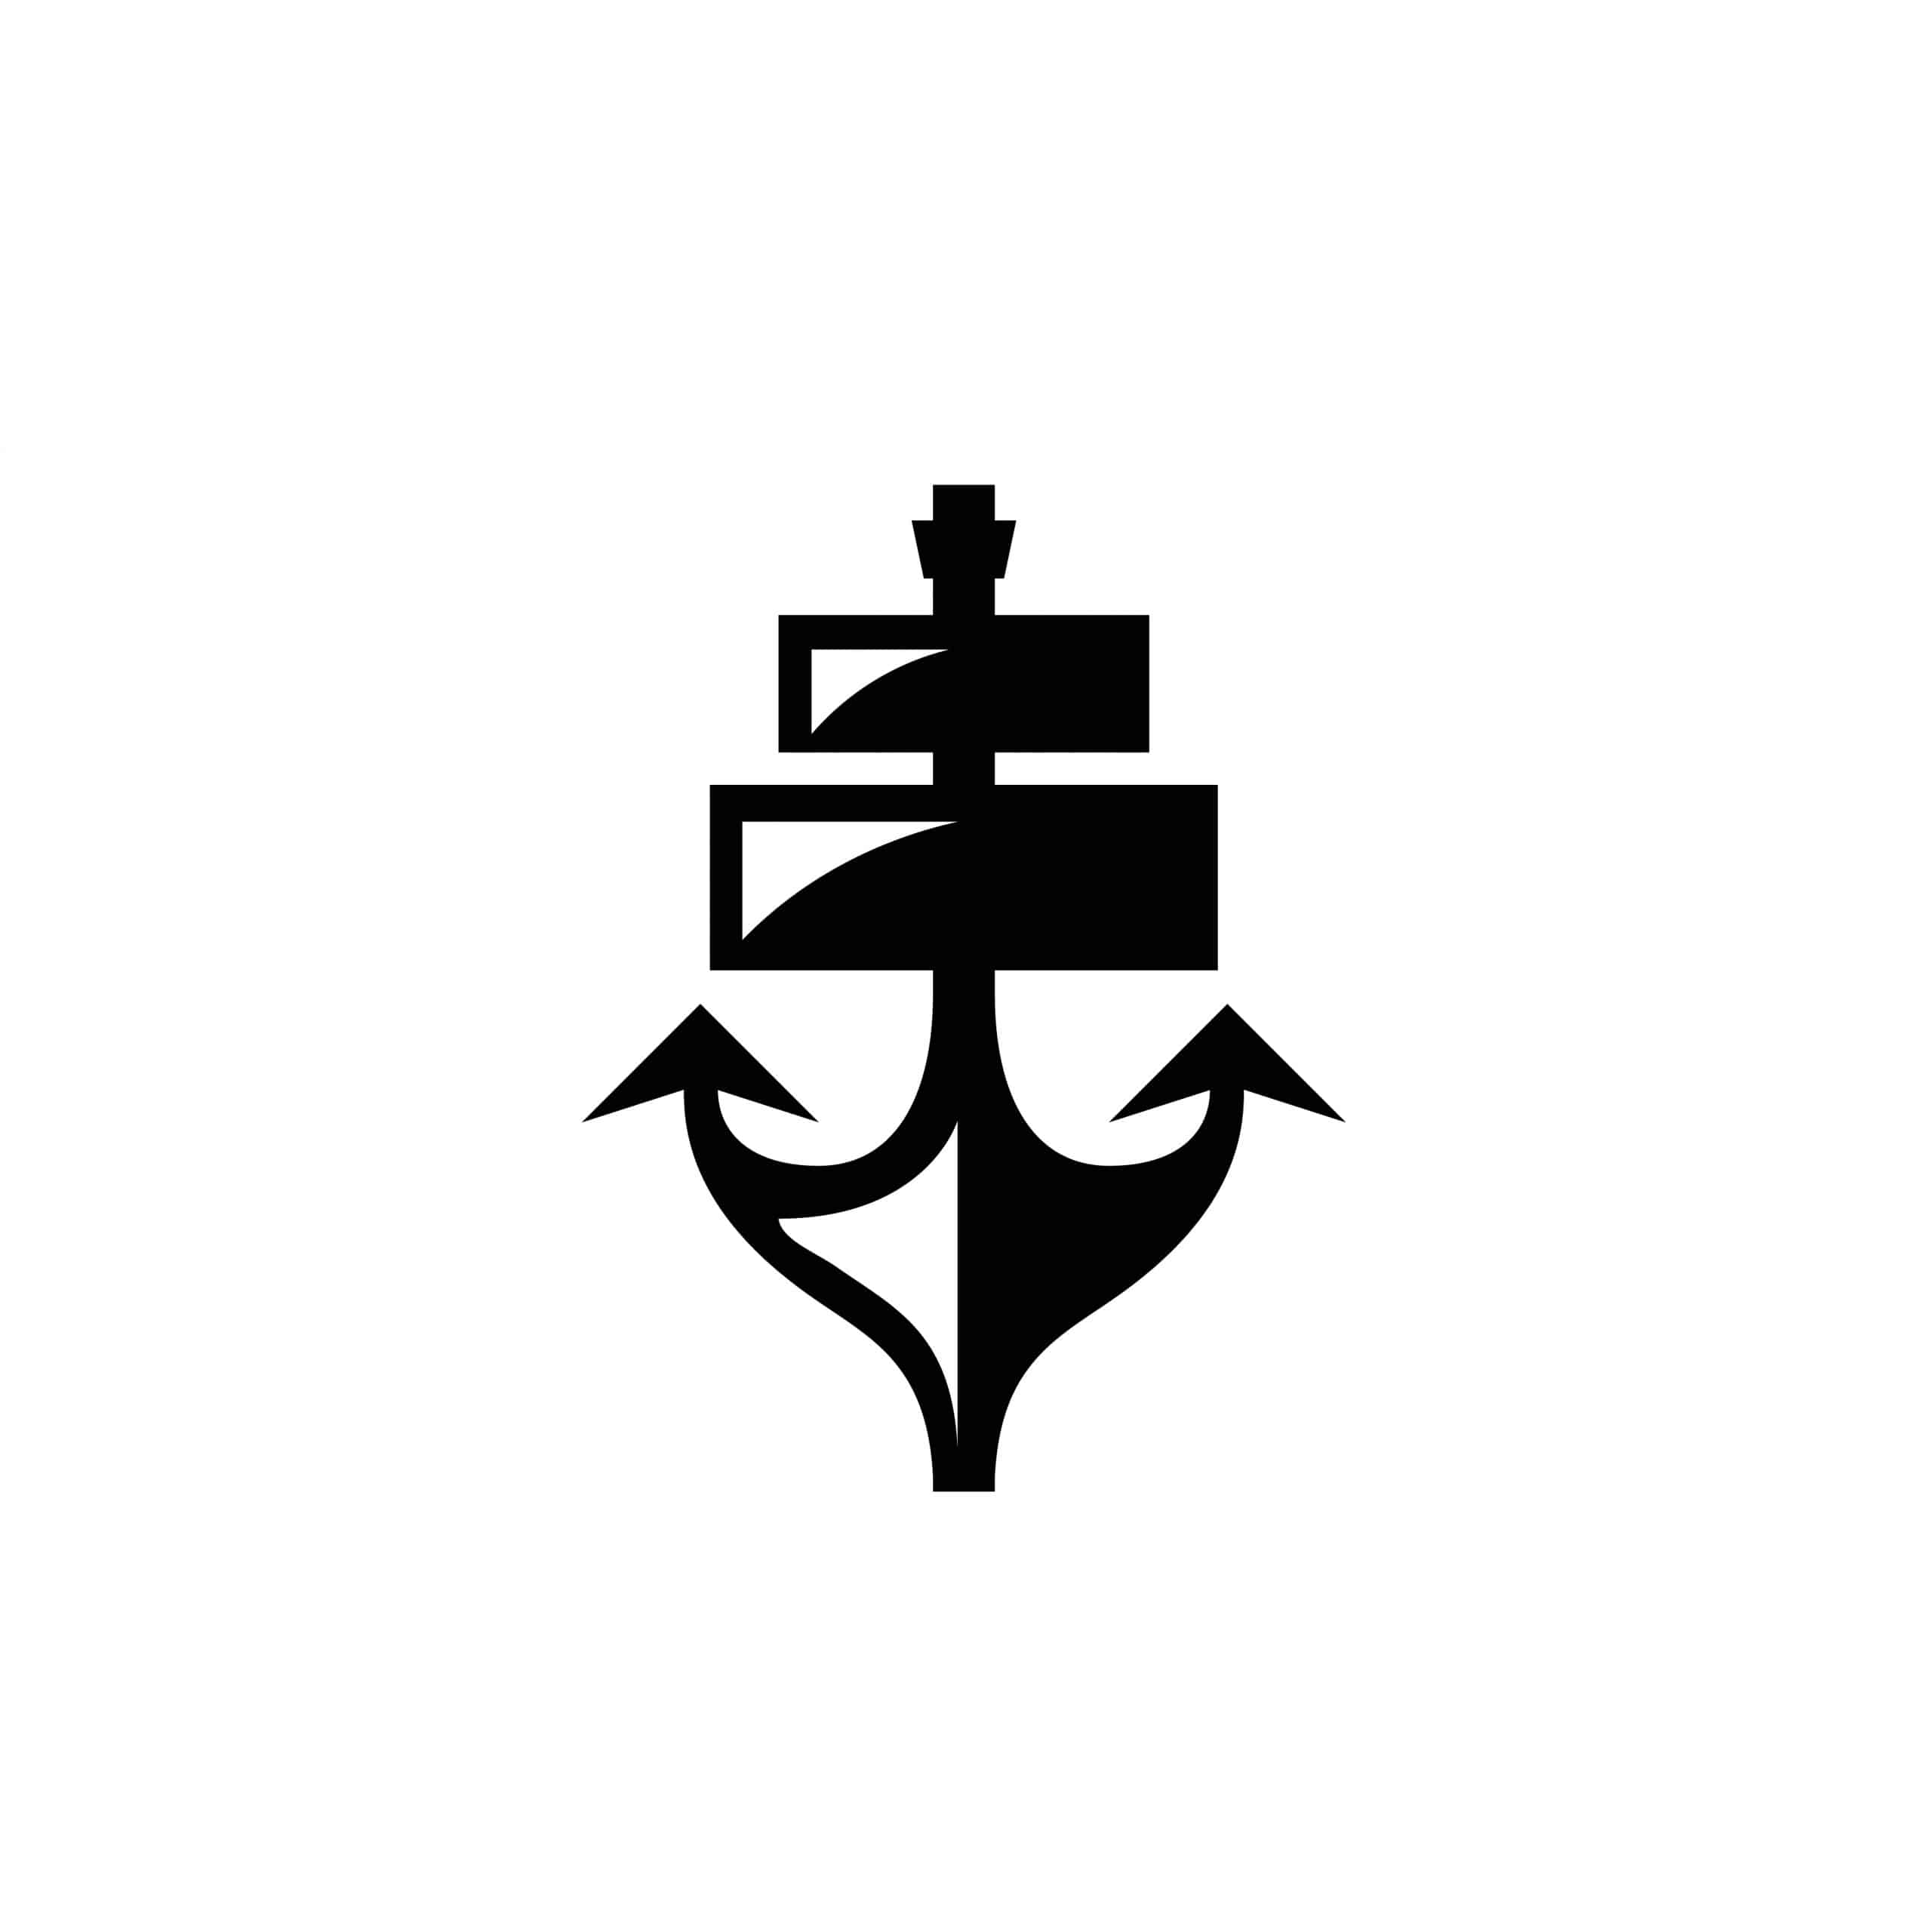 Yacht Boating logo designed around an anchor by Stellen Design Branding Agency in Los Angles CA